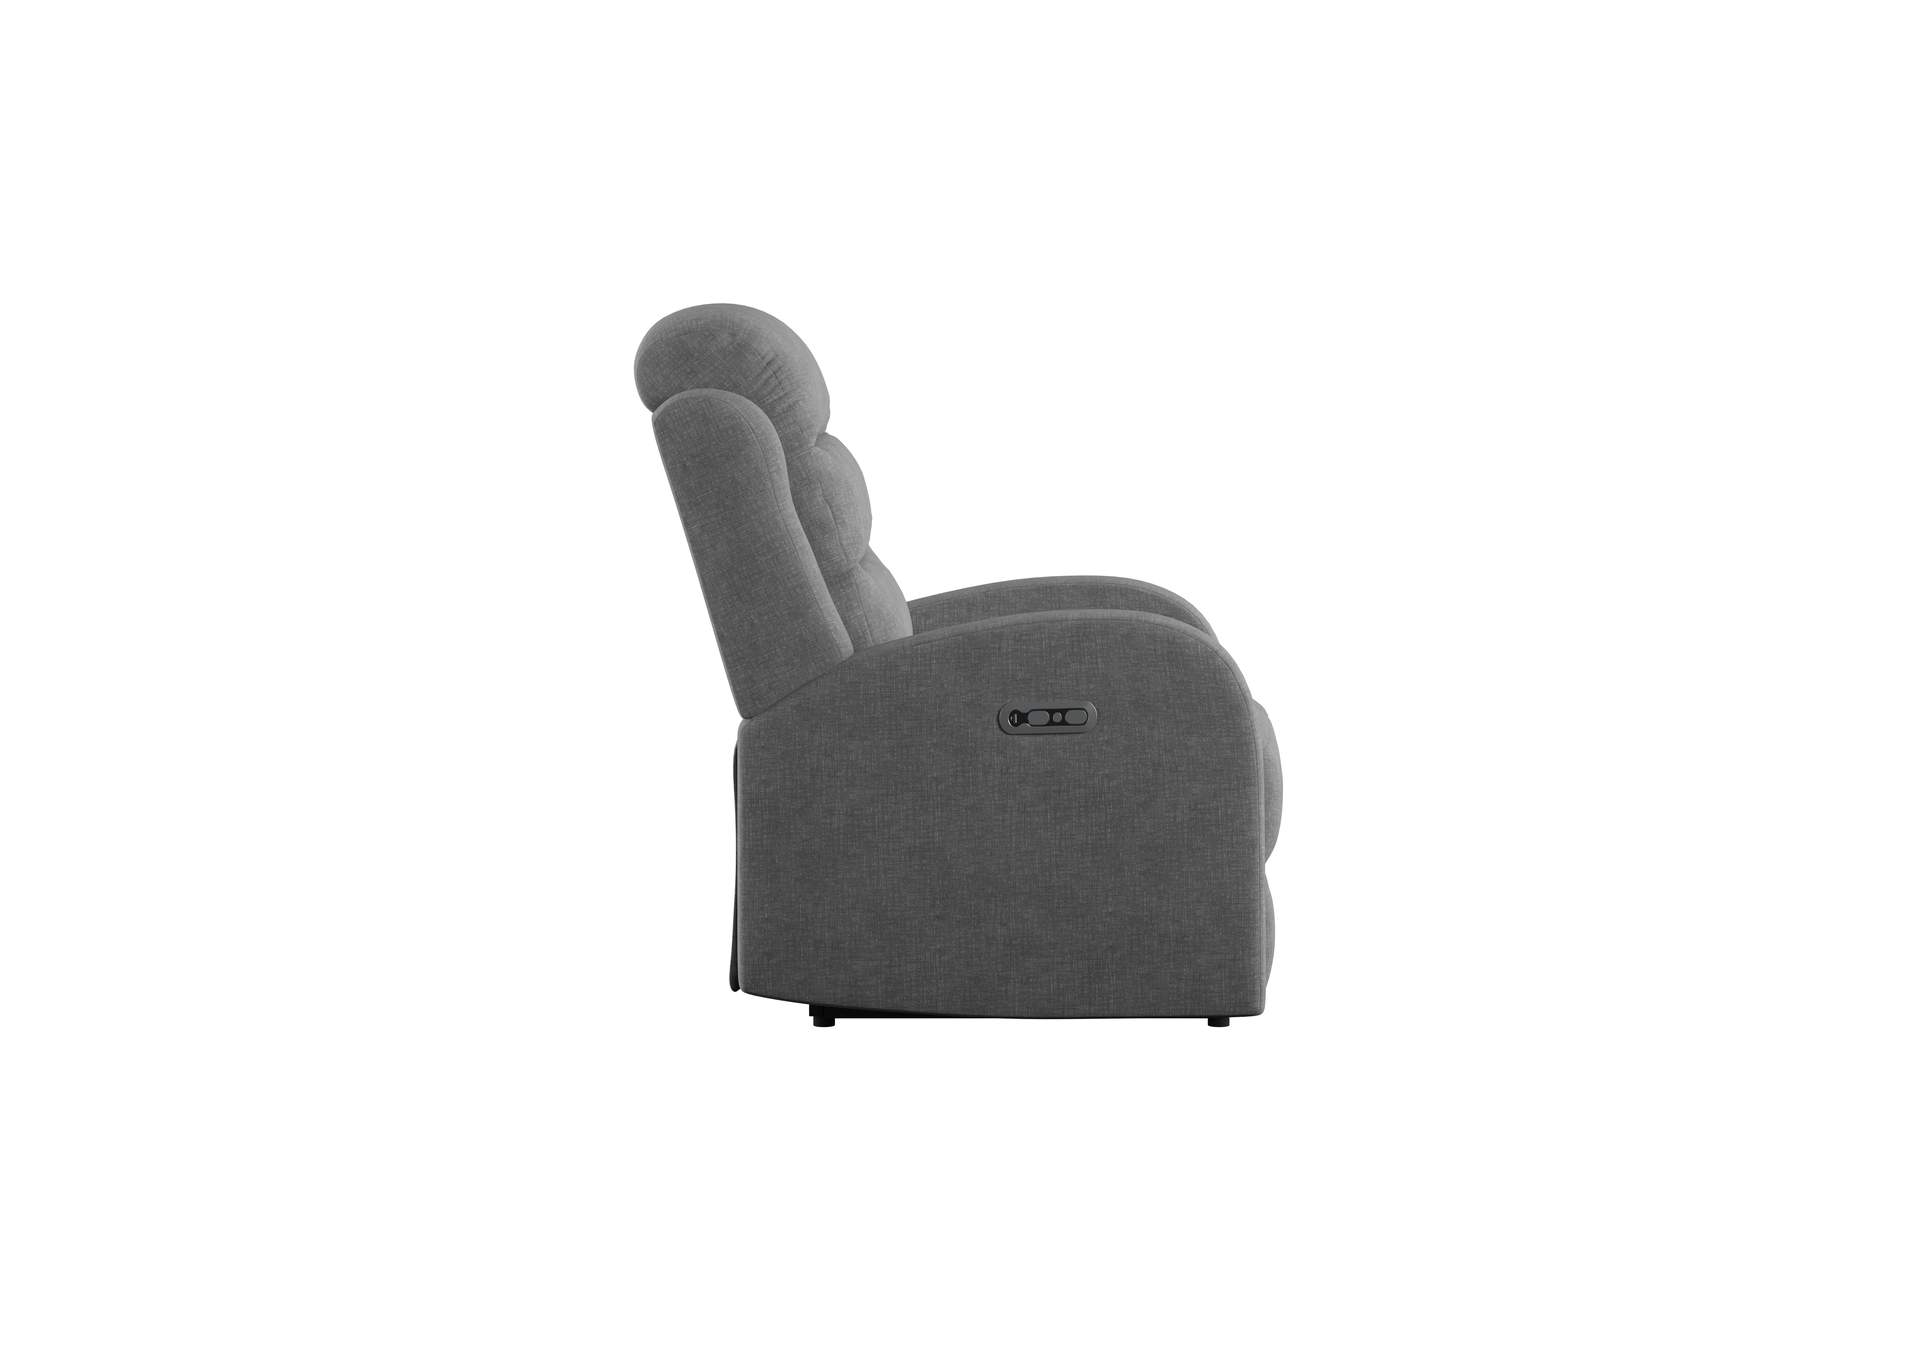 Harvey Dual Power Recliner And Headrest,Emerald Home Furnishings